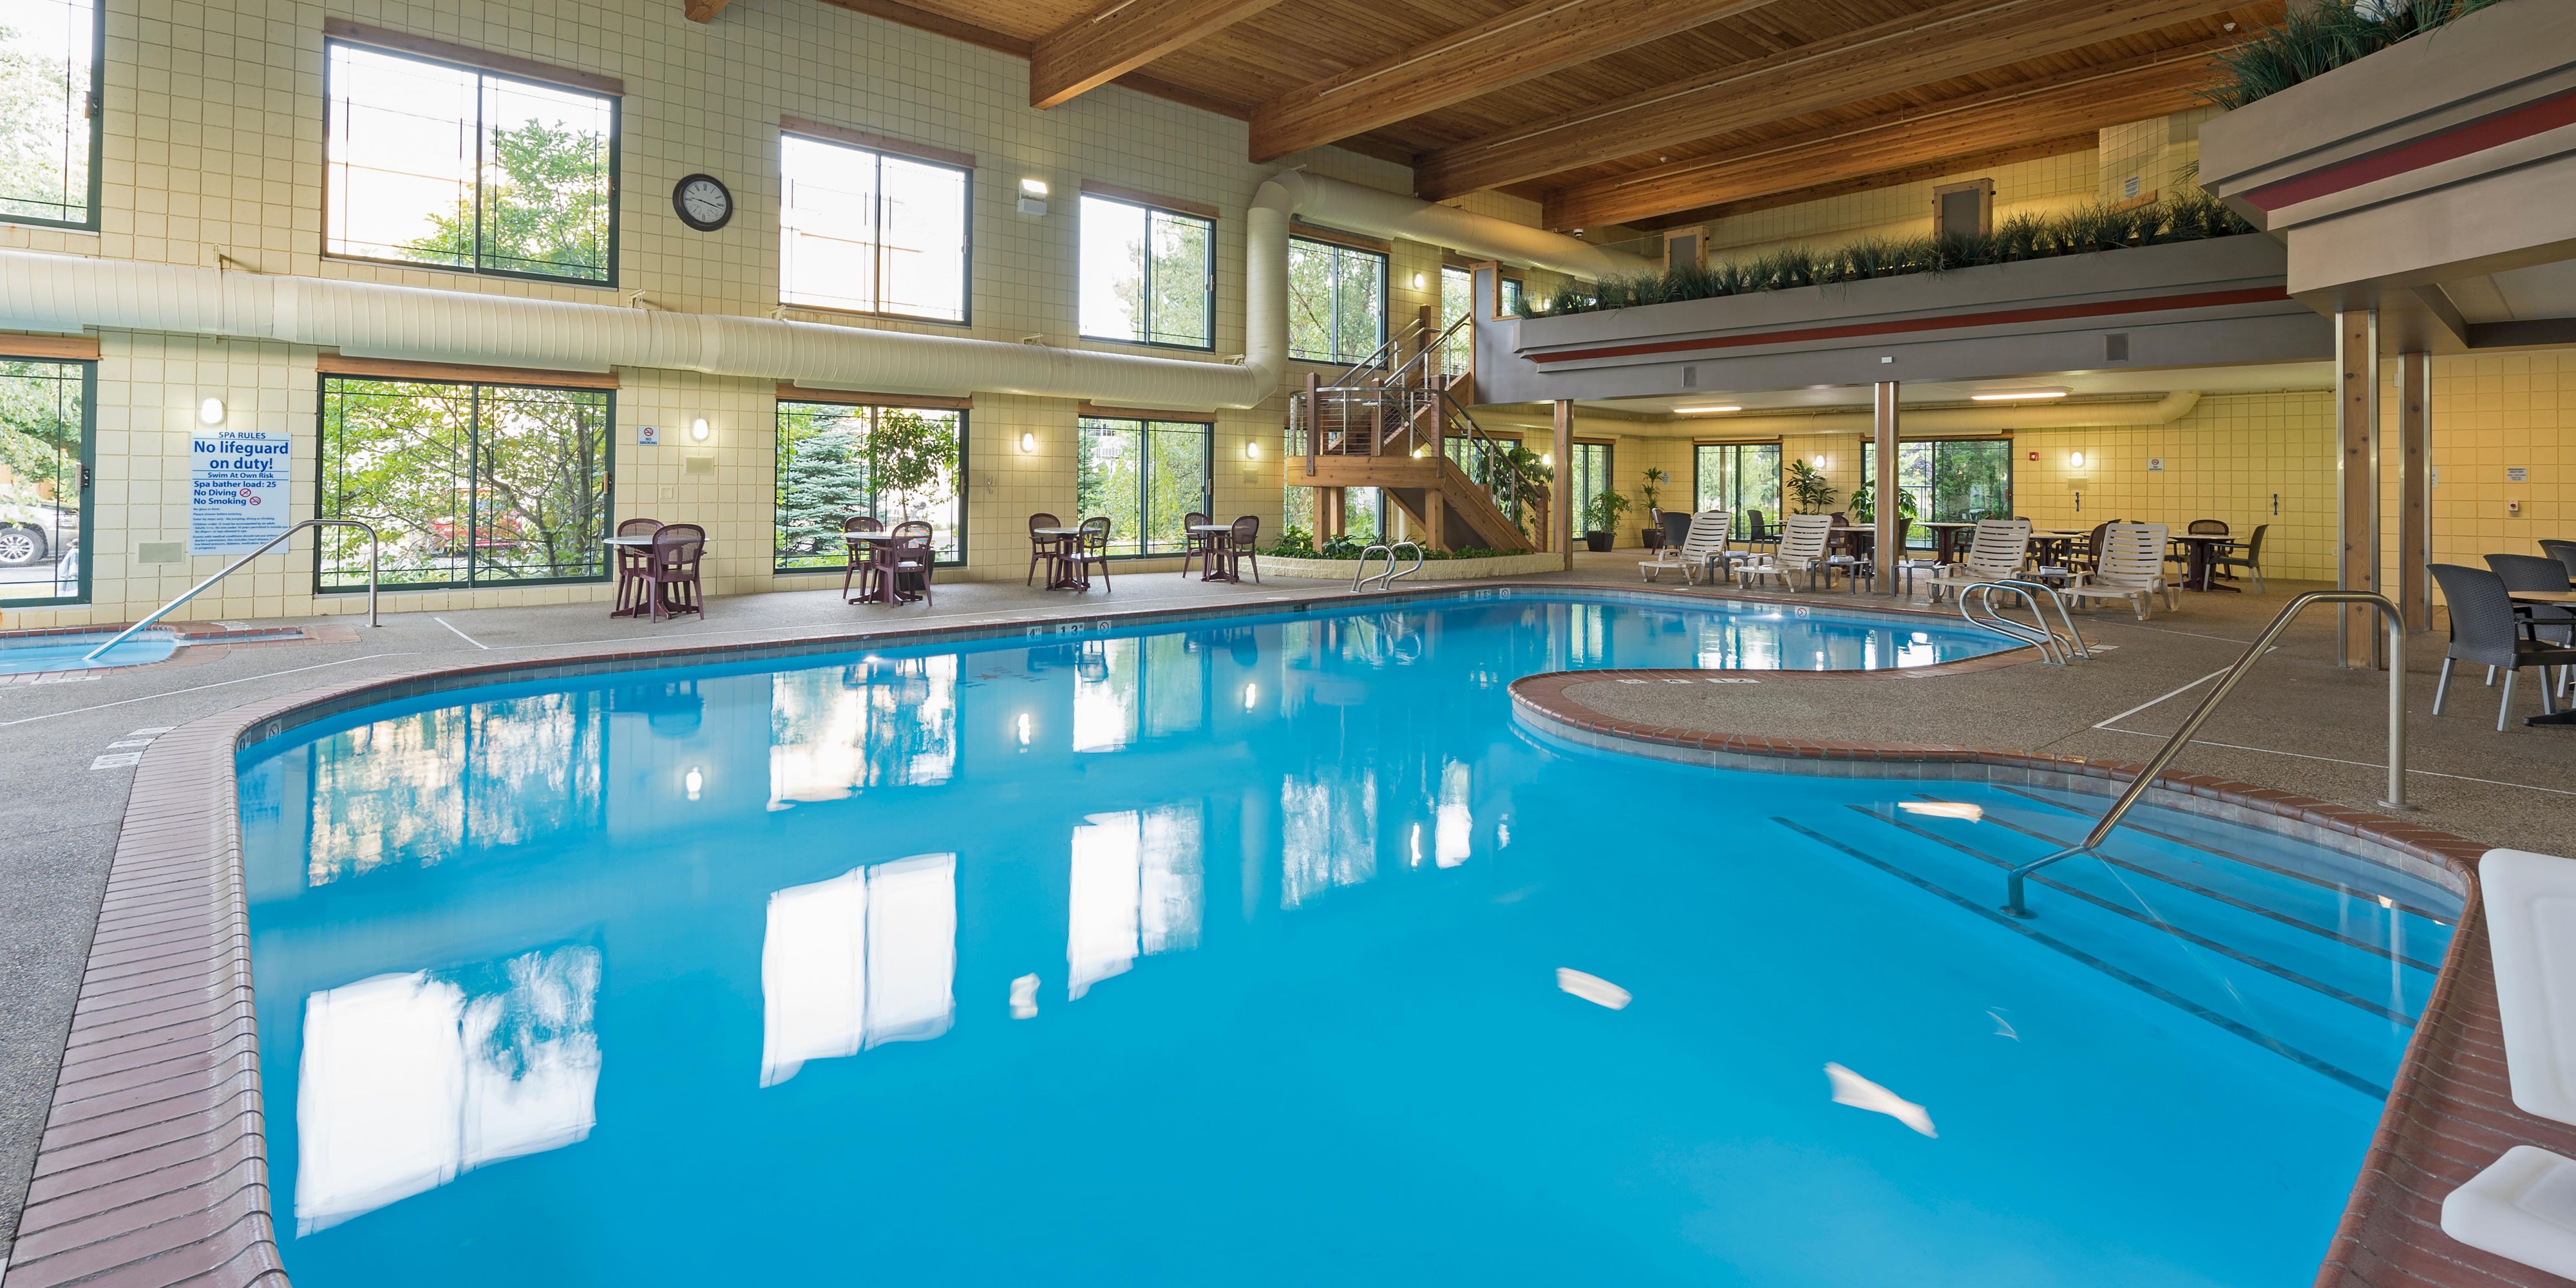 Our indoor, Michigan-shaped, heated pool & indoor/outdoor hot tub will be the highlight of your trip! Bring the family for a fun weekend away or just relax in the hot tub after a day filled with meetings. 